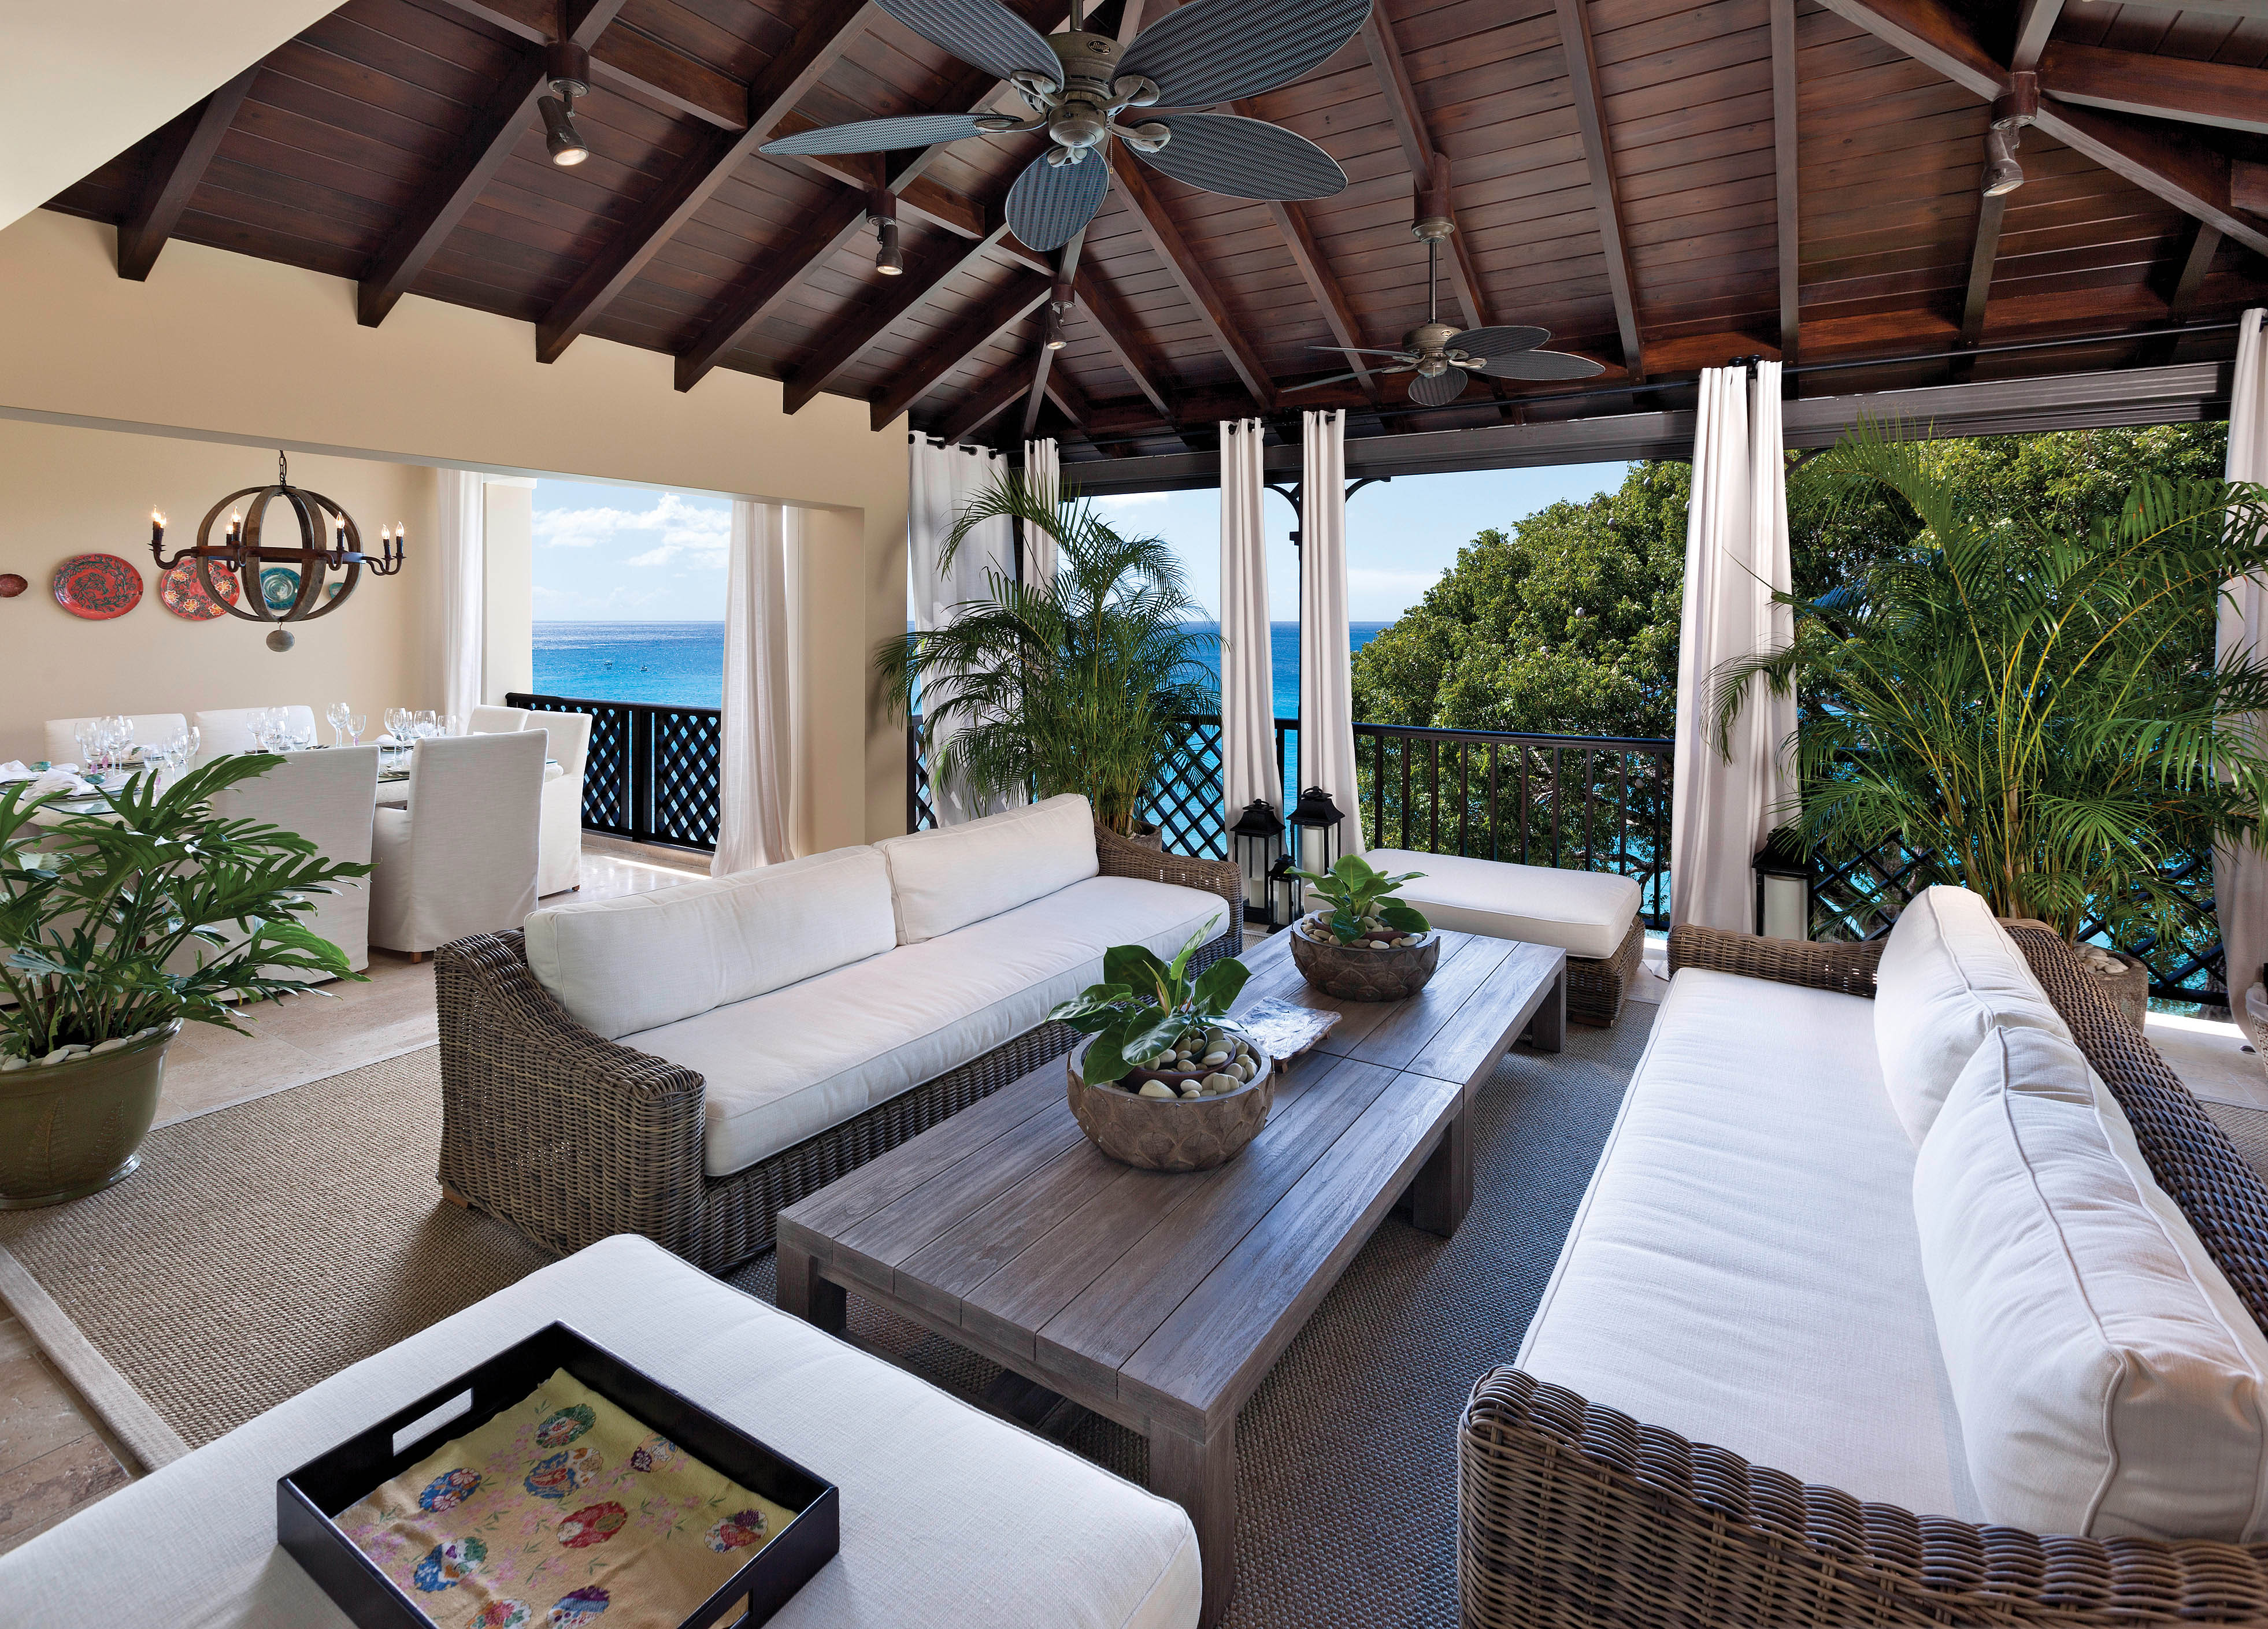 Langara’s 6,500 square feet of elegantly appointed indoor spaces open seamlessly to the furnished terraces with views of the Caribbean and the Platinum Coast of Barbados.